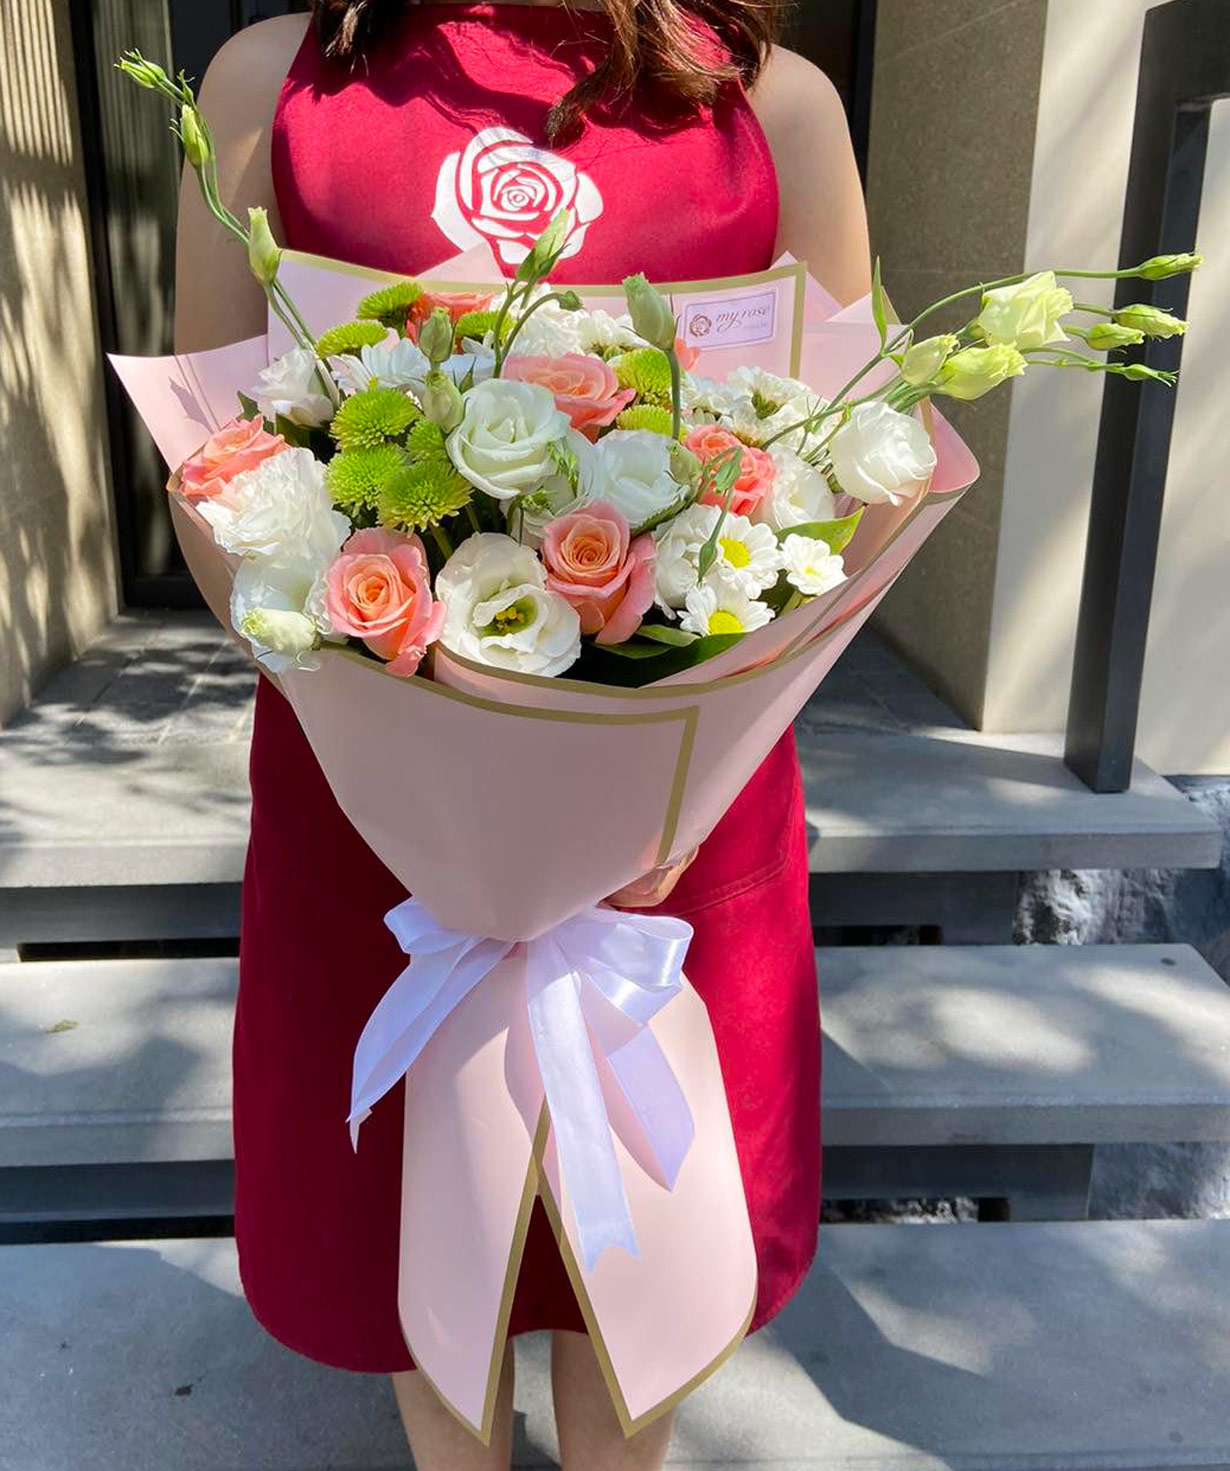 Bouquet `Prato` with roses and lisianthus